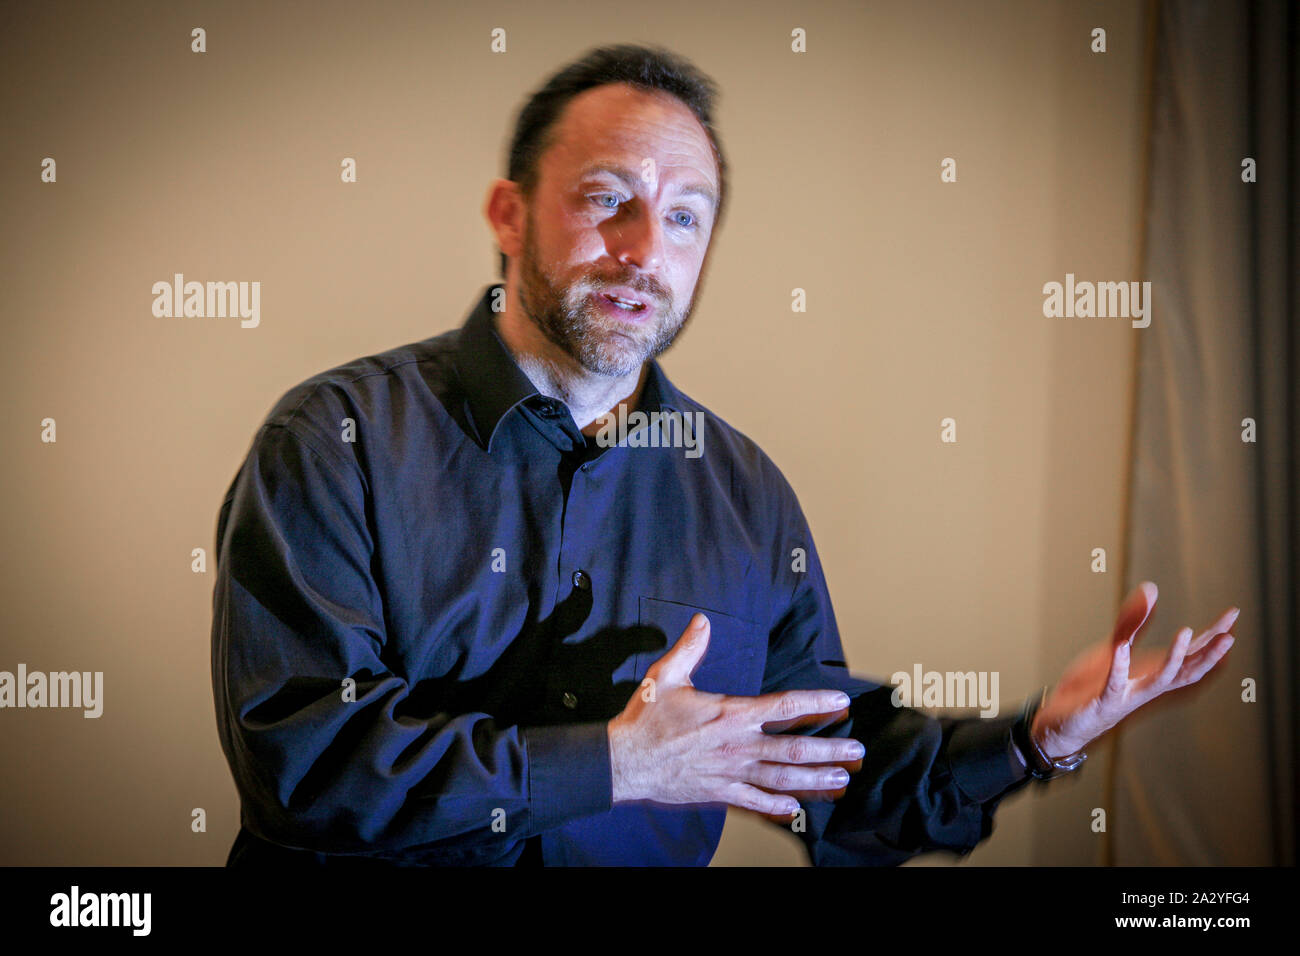 Wikipedia Founder Jimmy Wales. Jimmy Donai Wales is an American-British internet entrepreneur and former financial trader. He is best know for cofounding the online non-profit encyclopedia Wikipedia. Stock Photo